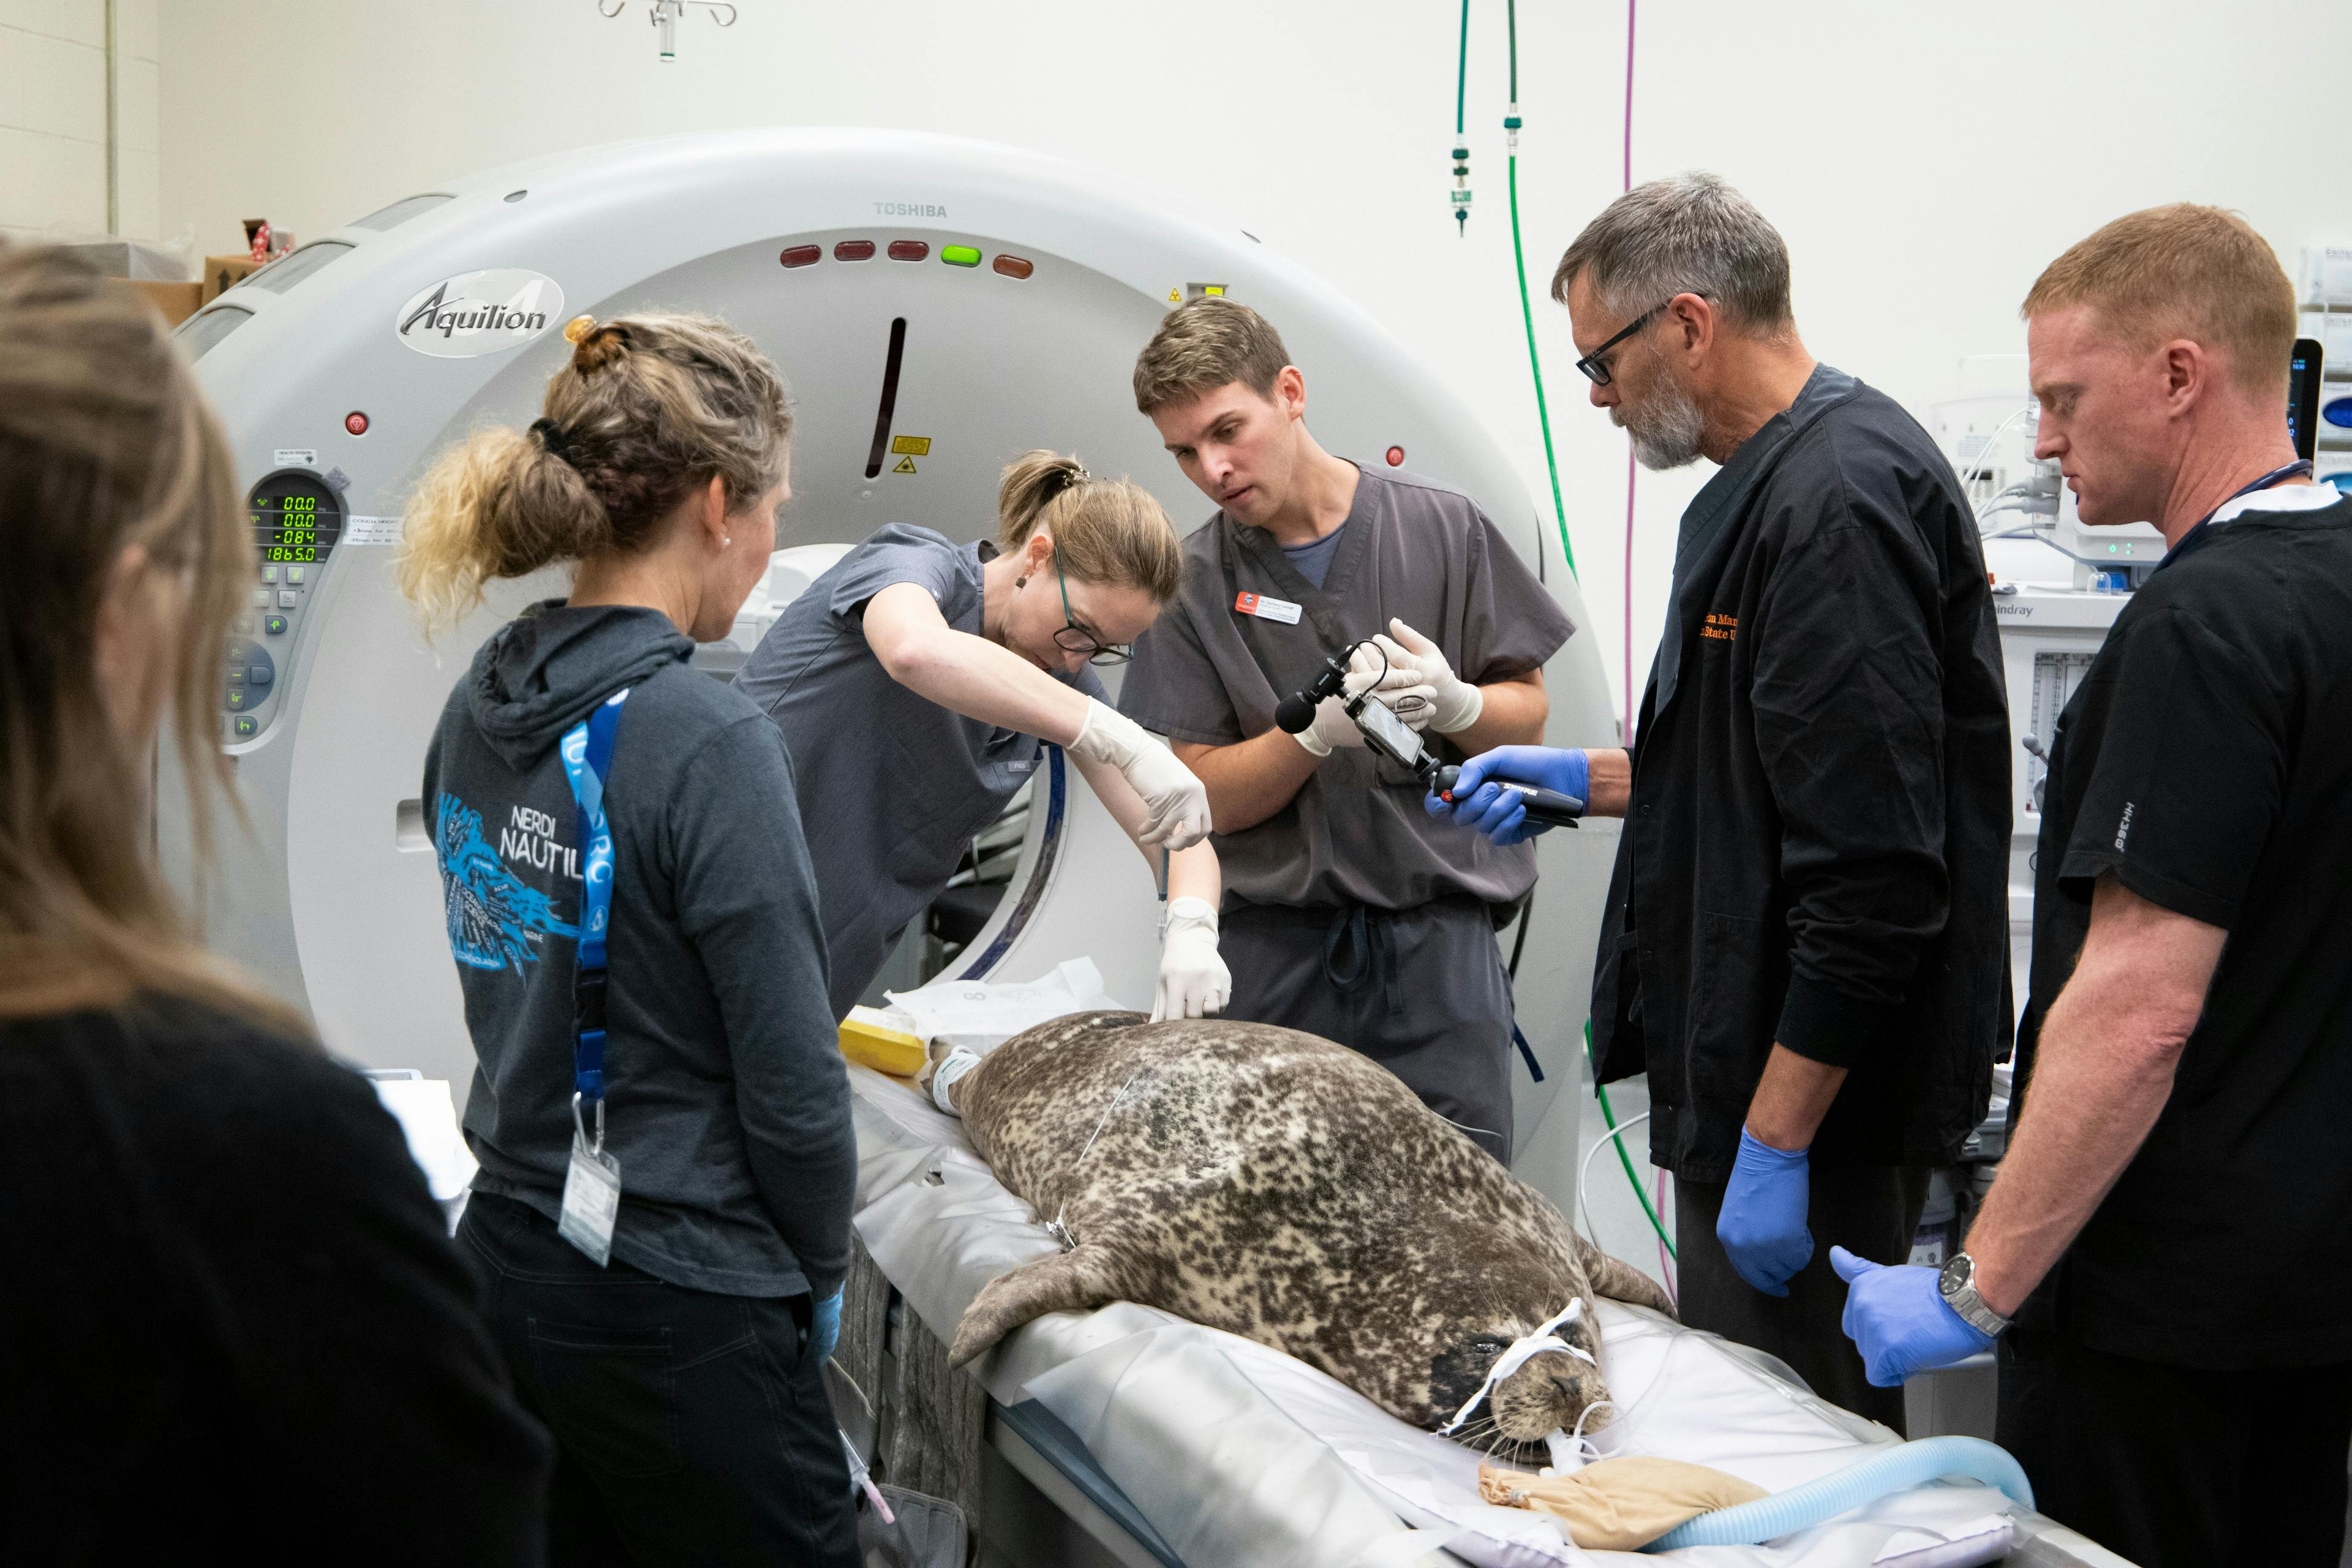 Boots the harbor seal being prepped by veterinary professionals (Image courtesty of Oregon State University Carlson College of Veterinary Medicine)